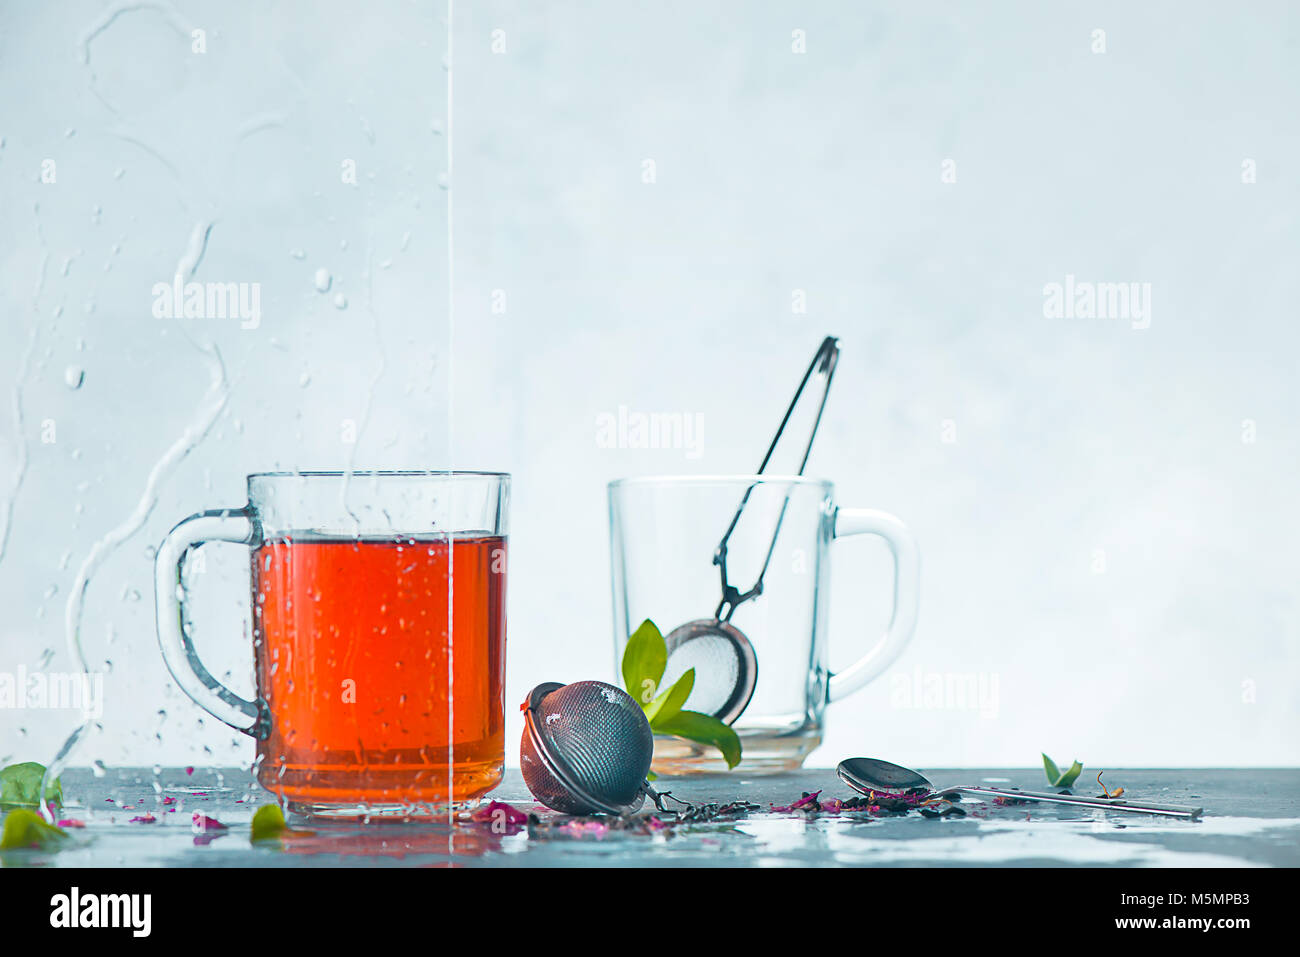 Cup of tea and cup with tea strainer, transparent on a light background with green leaves. Spring still life with raindrops on a window. Header with copy space. Stock Photo